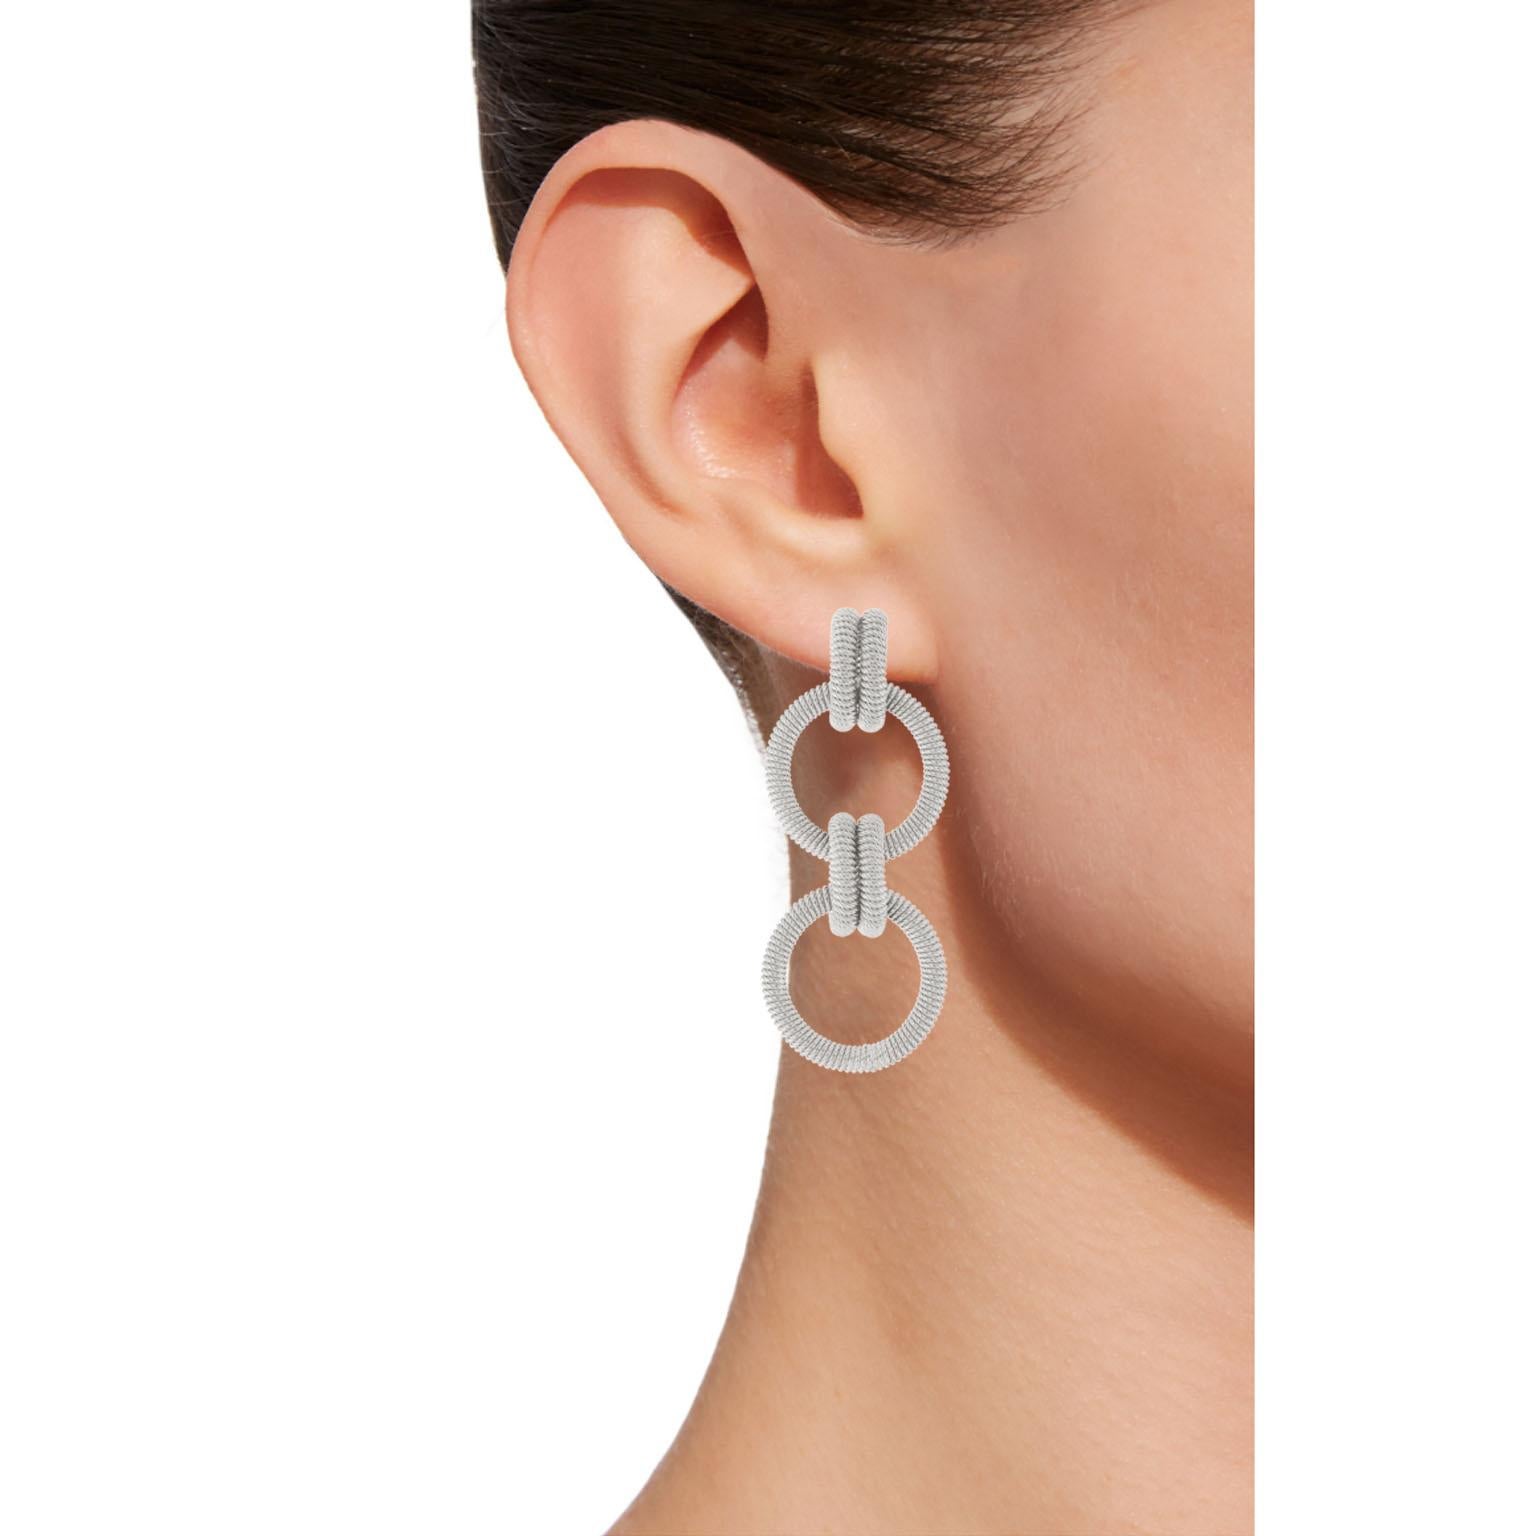 Alex Jona design collection, hand crafted in Italy, rhodium plated sterling silver twisted wire ear pendants. Dimensions: H 1.9 in / 5 cm X W 0.81 in / 2 cm X D 0.12 in / 3 mm
Weight: 13.1 g

Alex Jona jewels stand out, not only for their special